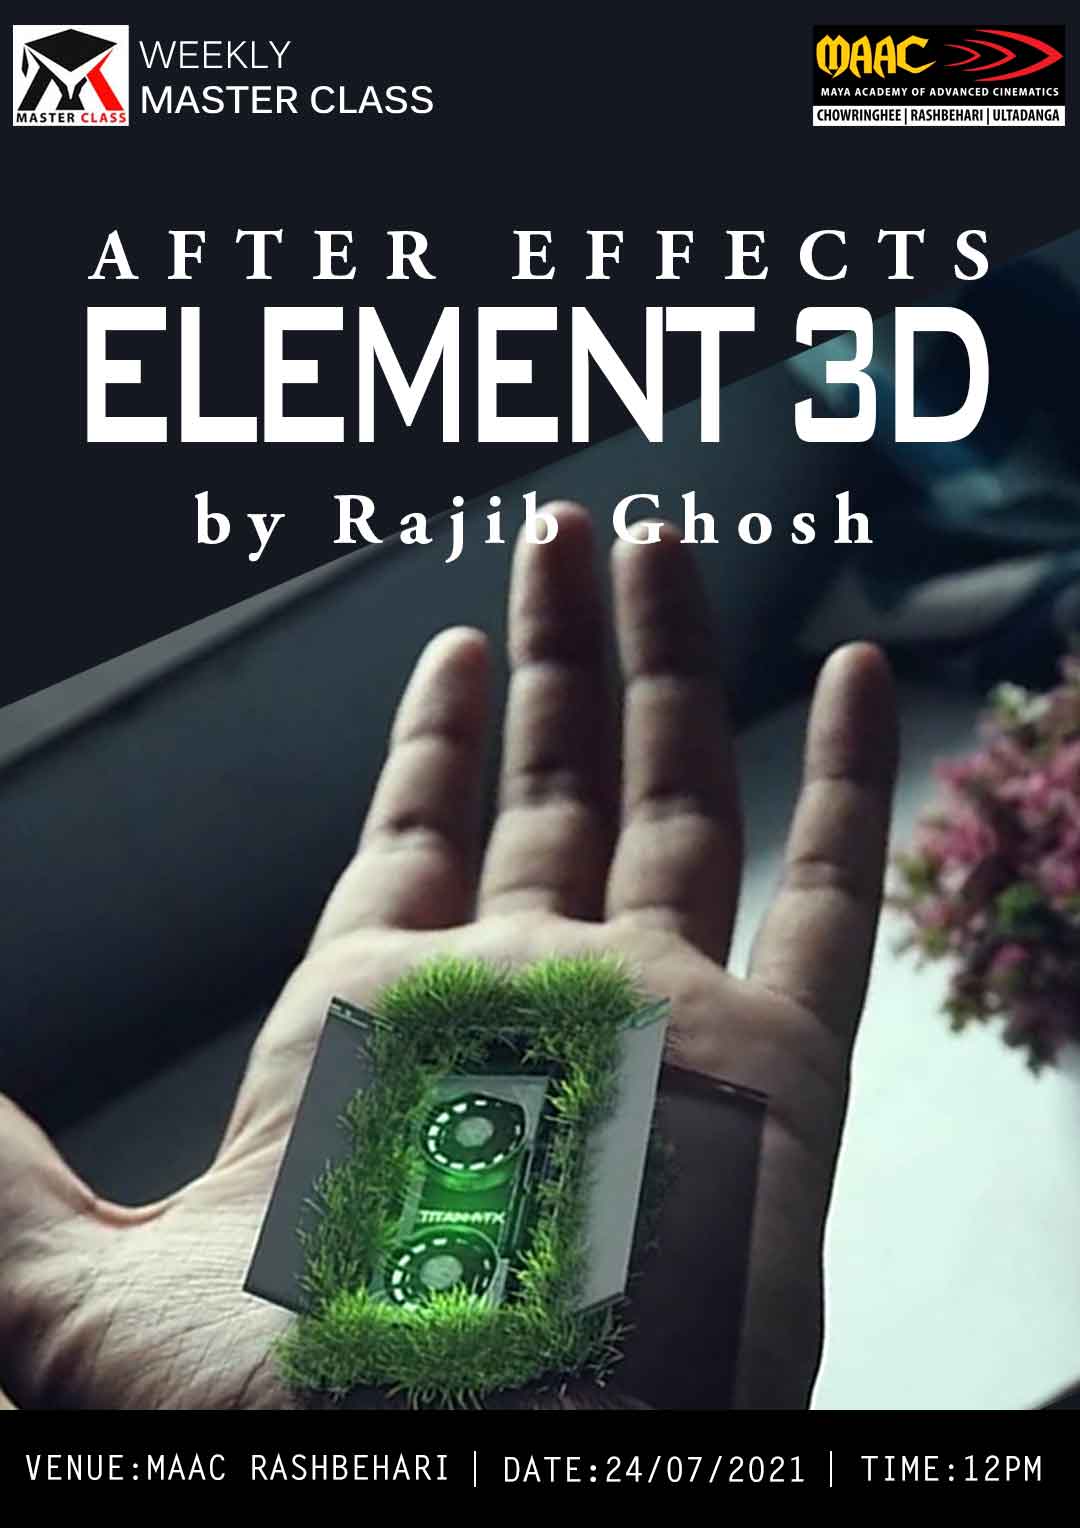 Weekly Master Class on After Effect Element 3D